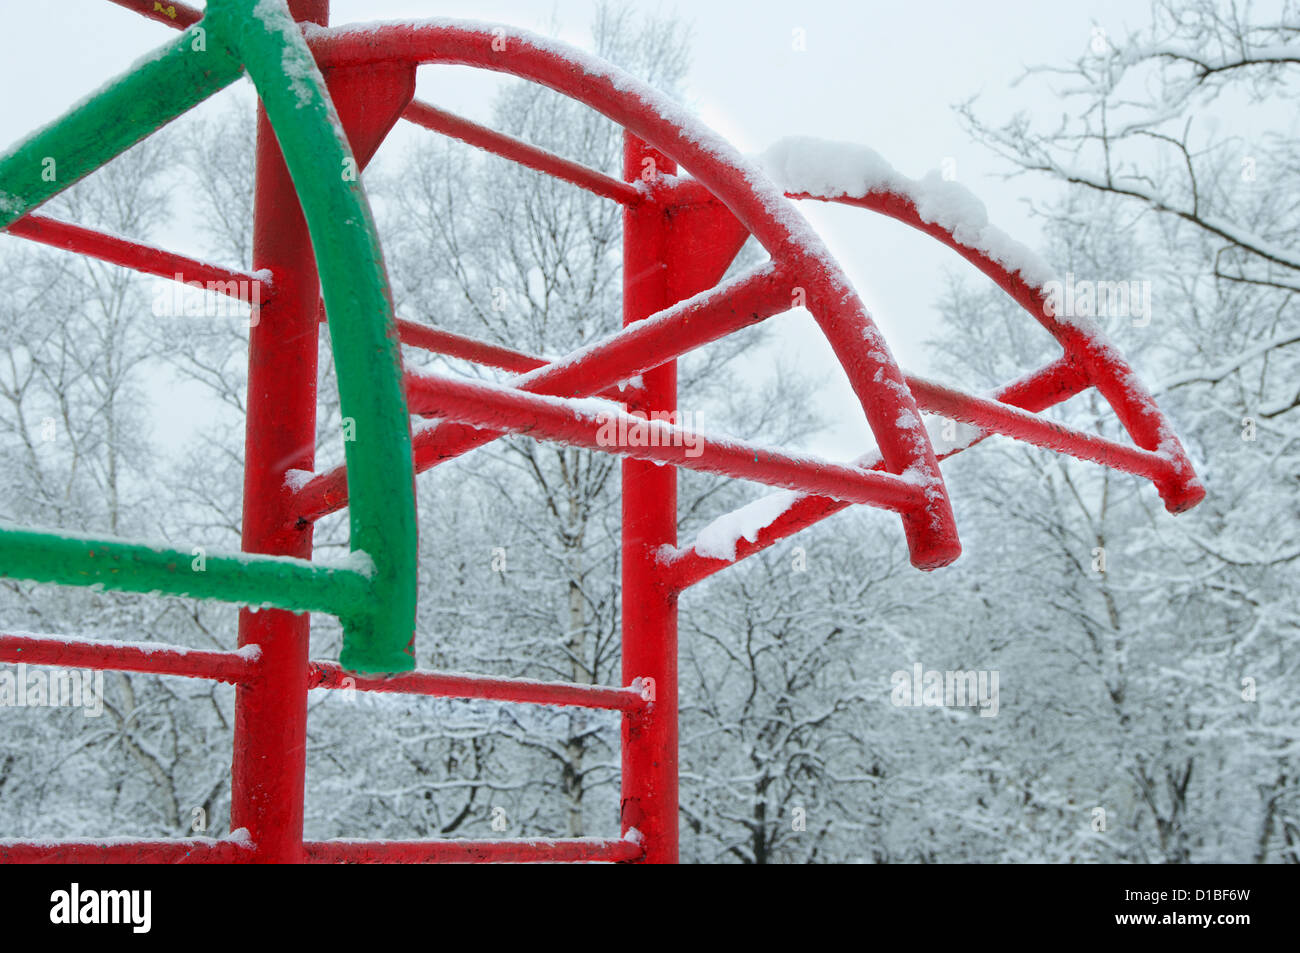 horizontal bar different colors snow clad . outdoors Stock Photo